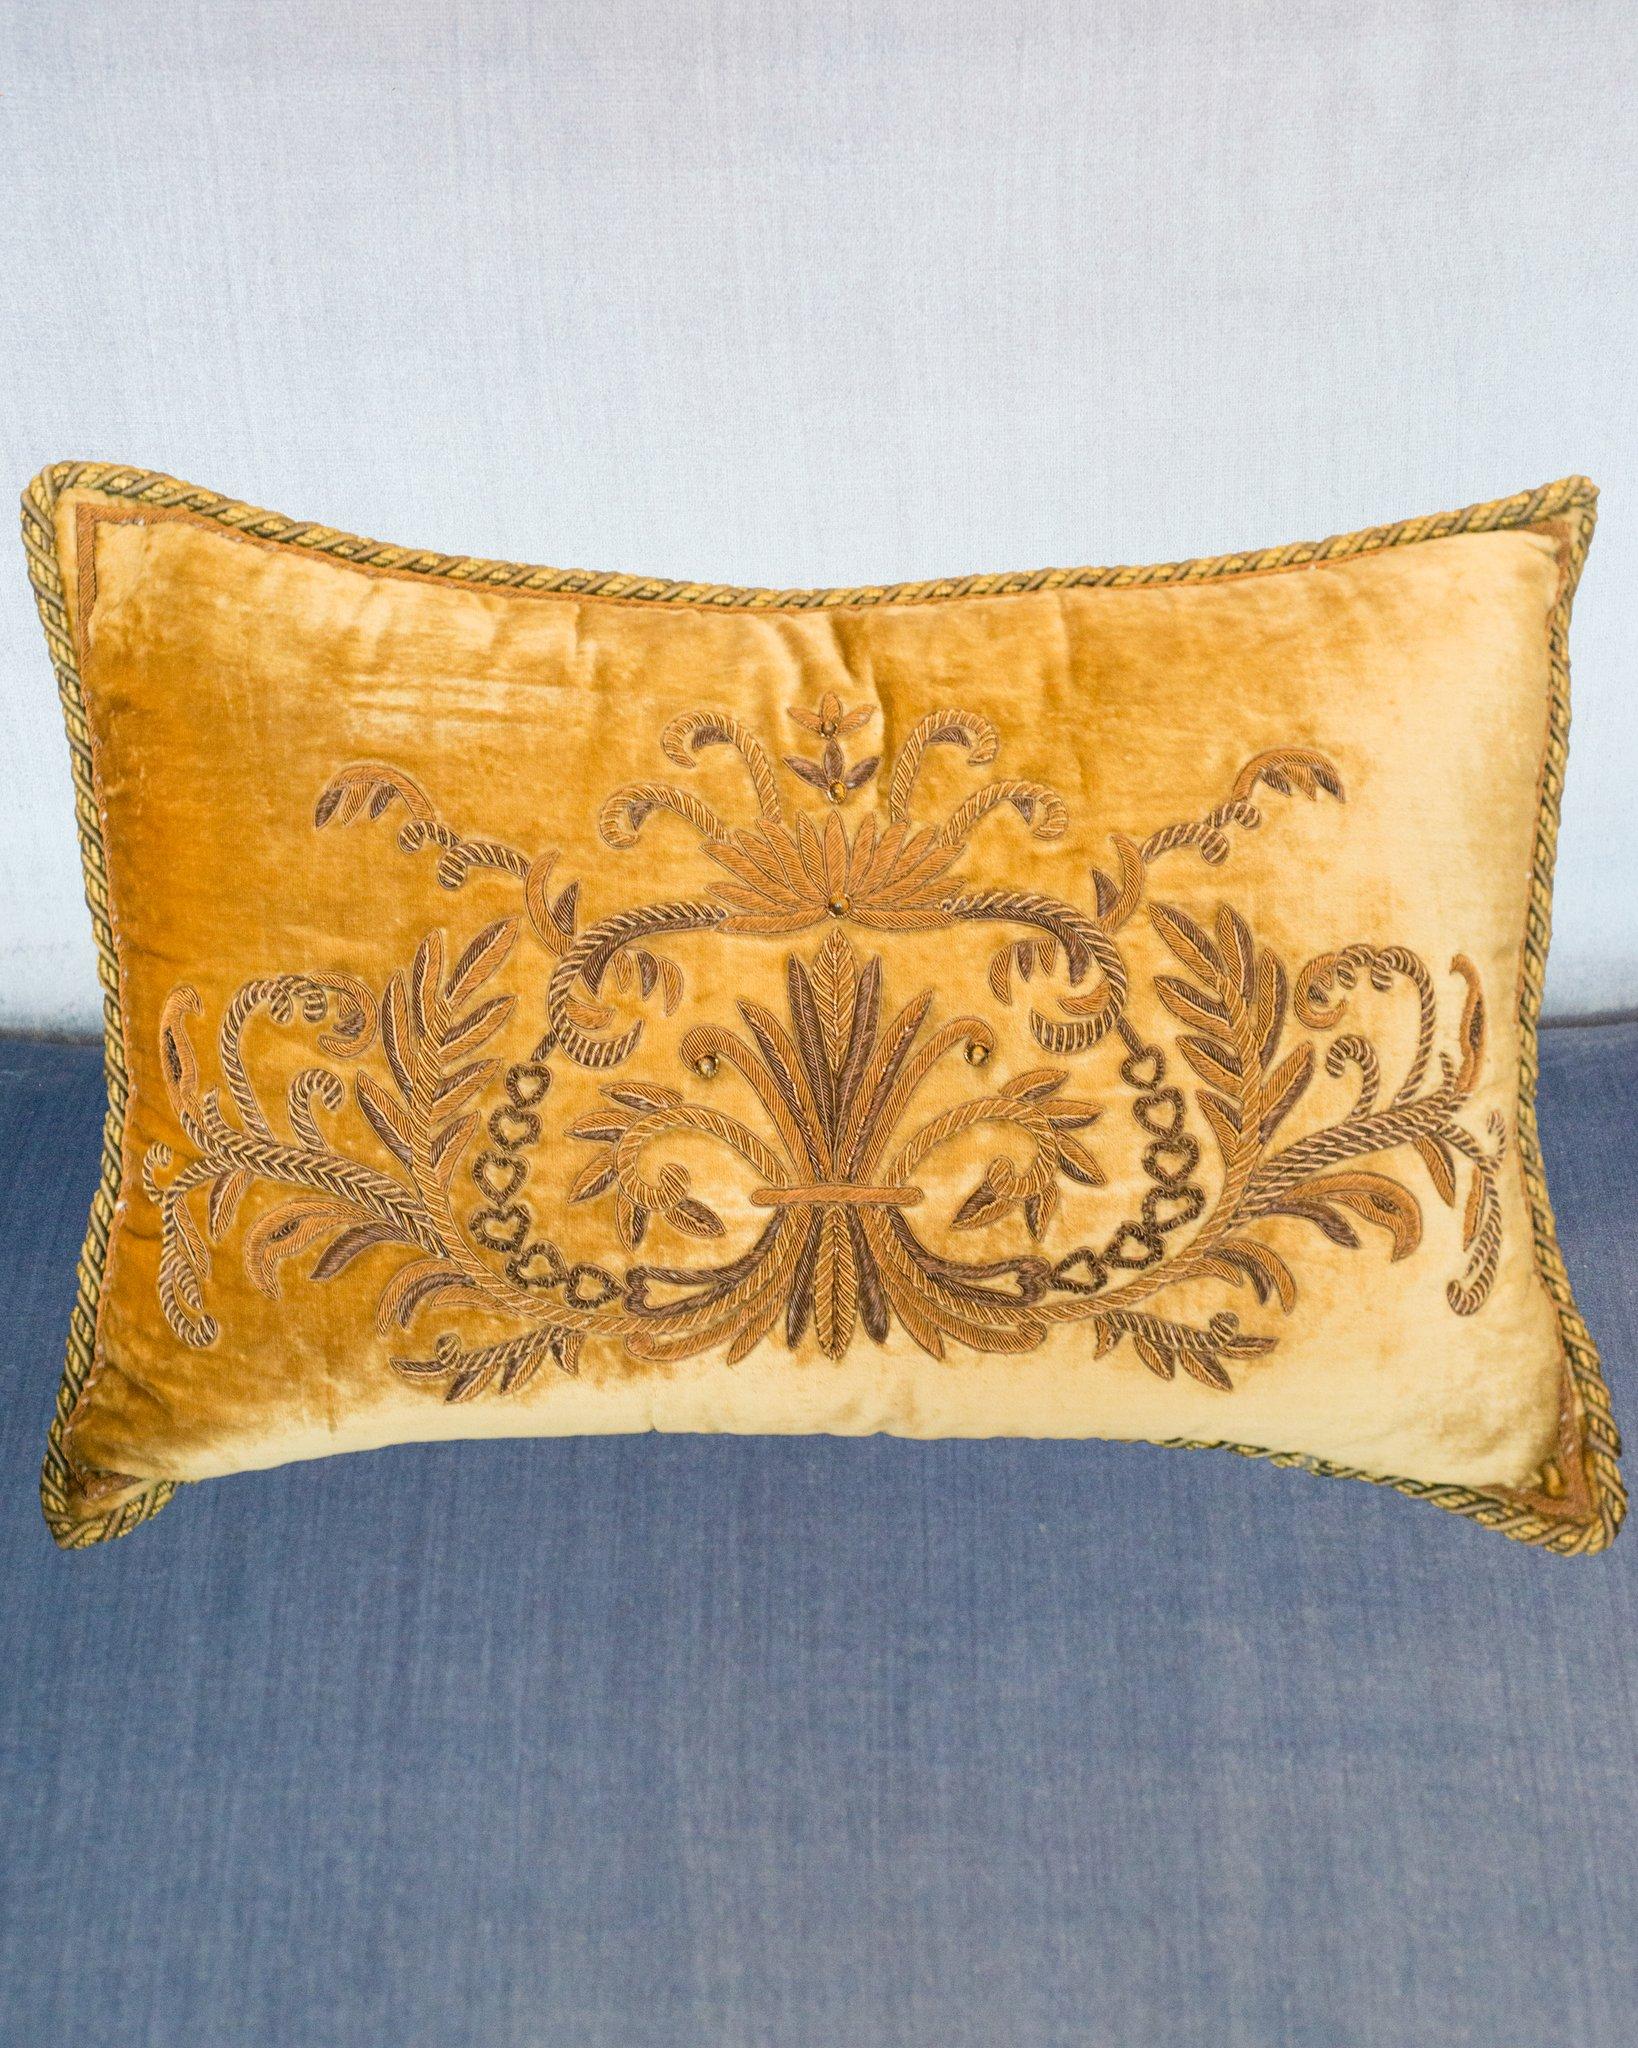 A large gold velvet pillow with ornate metallic applique, tigers' eye beads, and a metallic rope trim. Button and loop closure on reverse, entirely filled with down and feather.